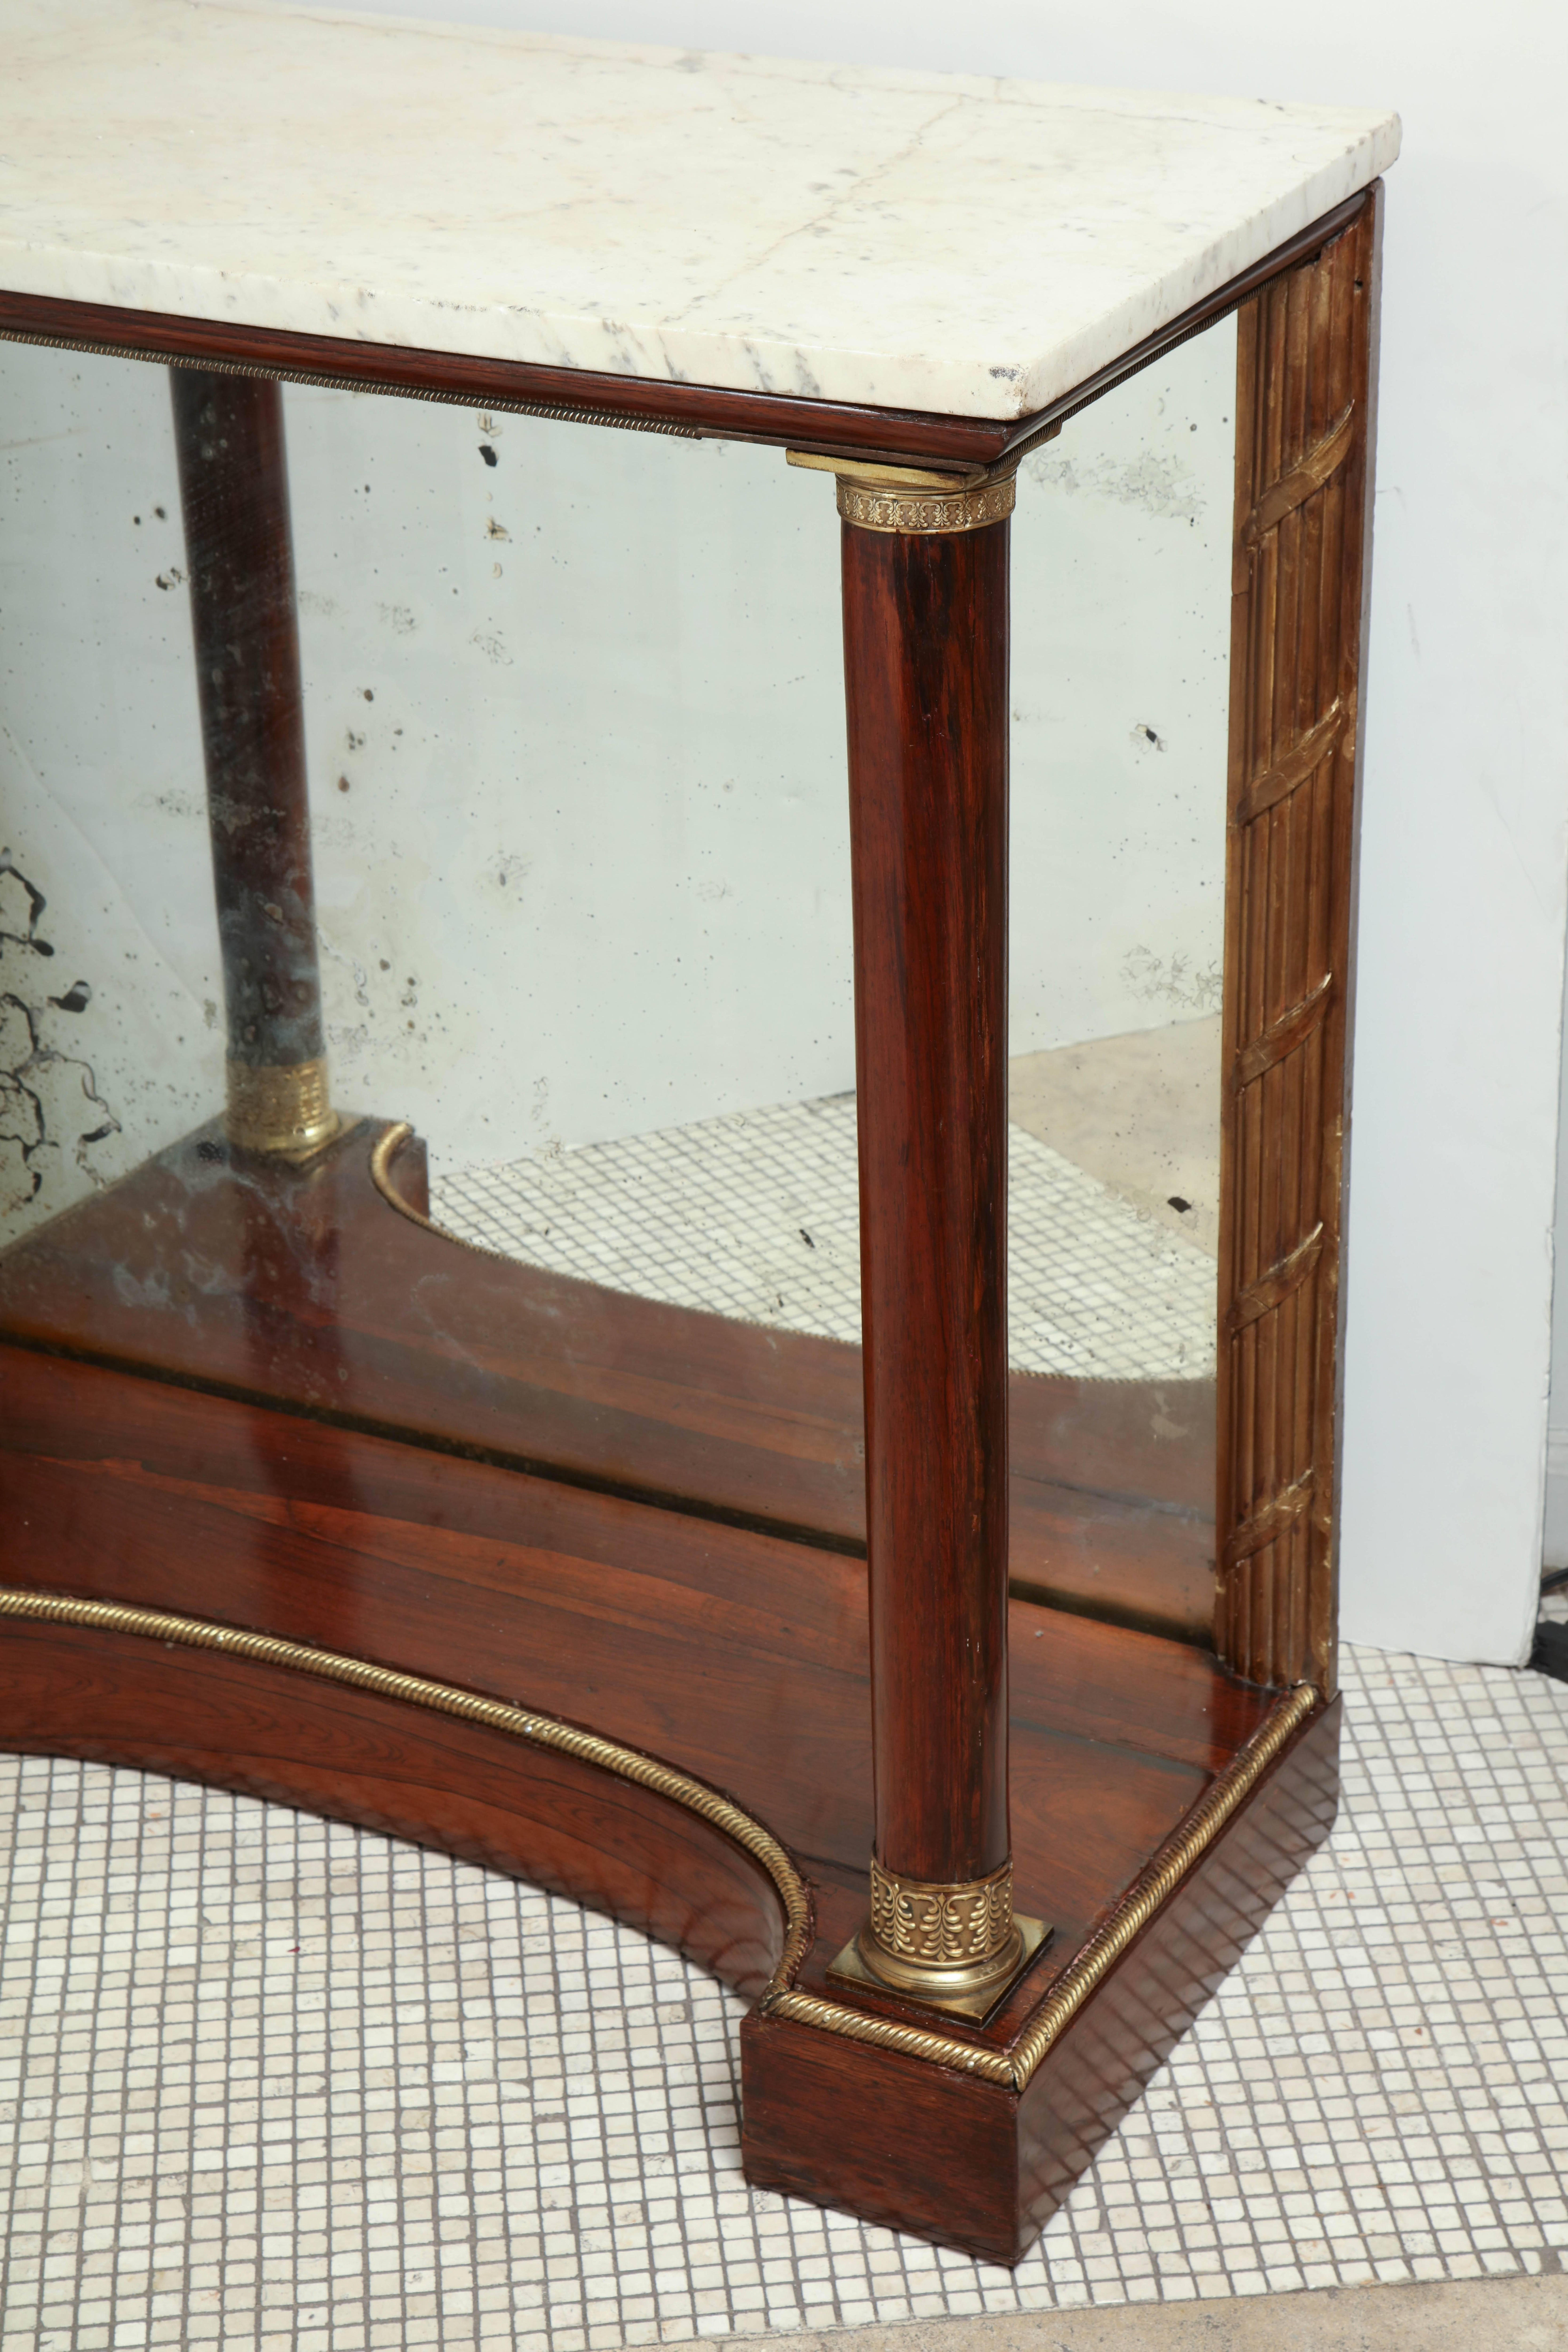 French mahogany marble-top console table with bronze capitals, gilded edge and mirror back.